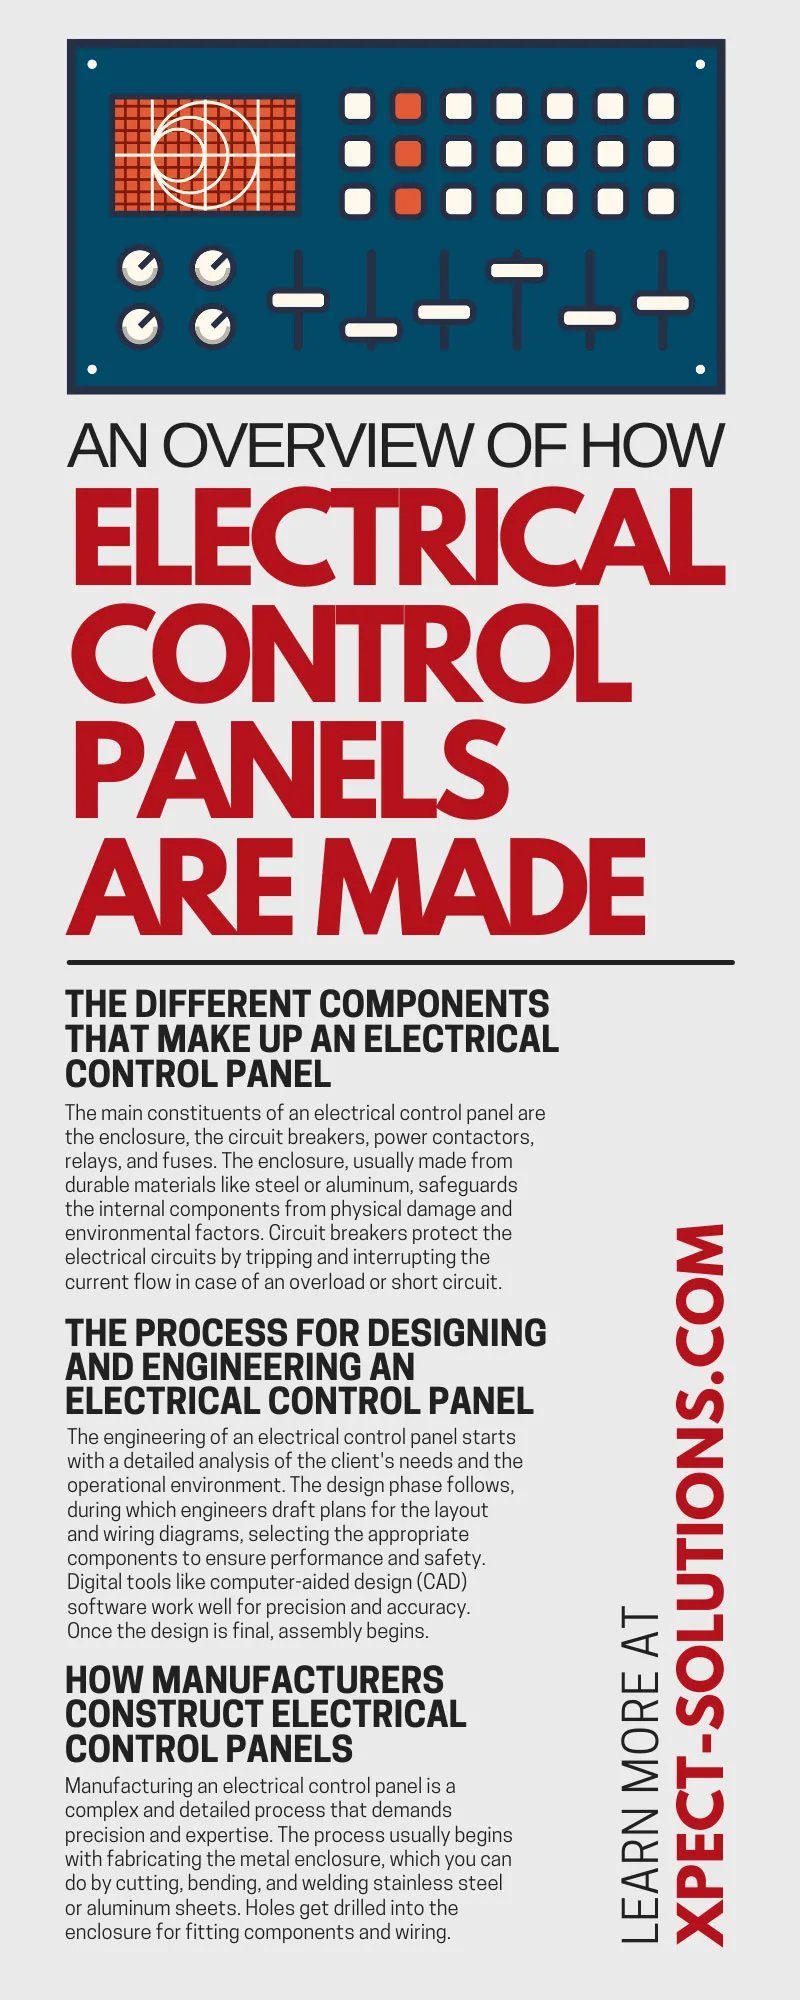 An Overview of How Electrical Control Panels Are Made